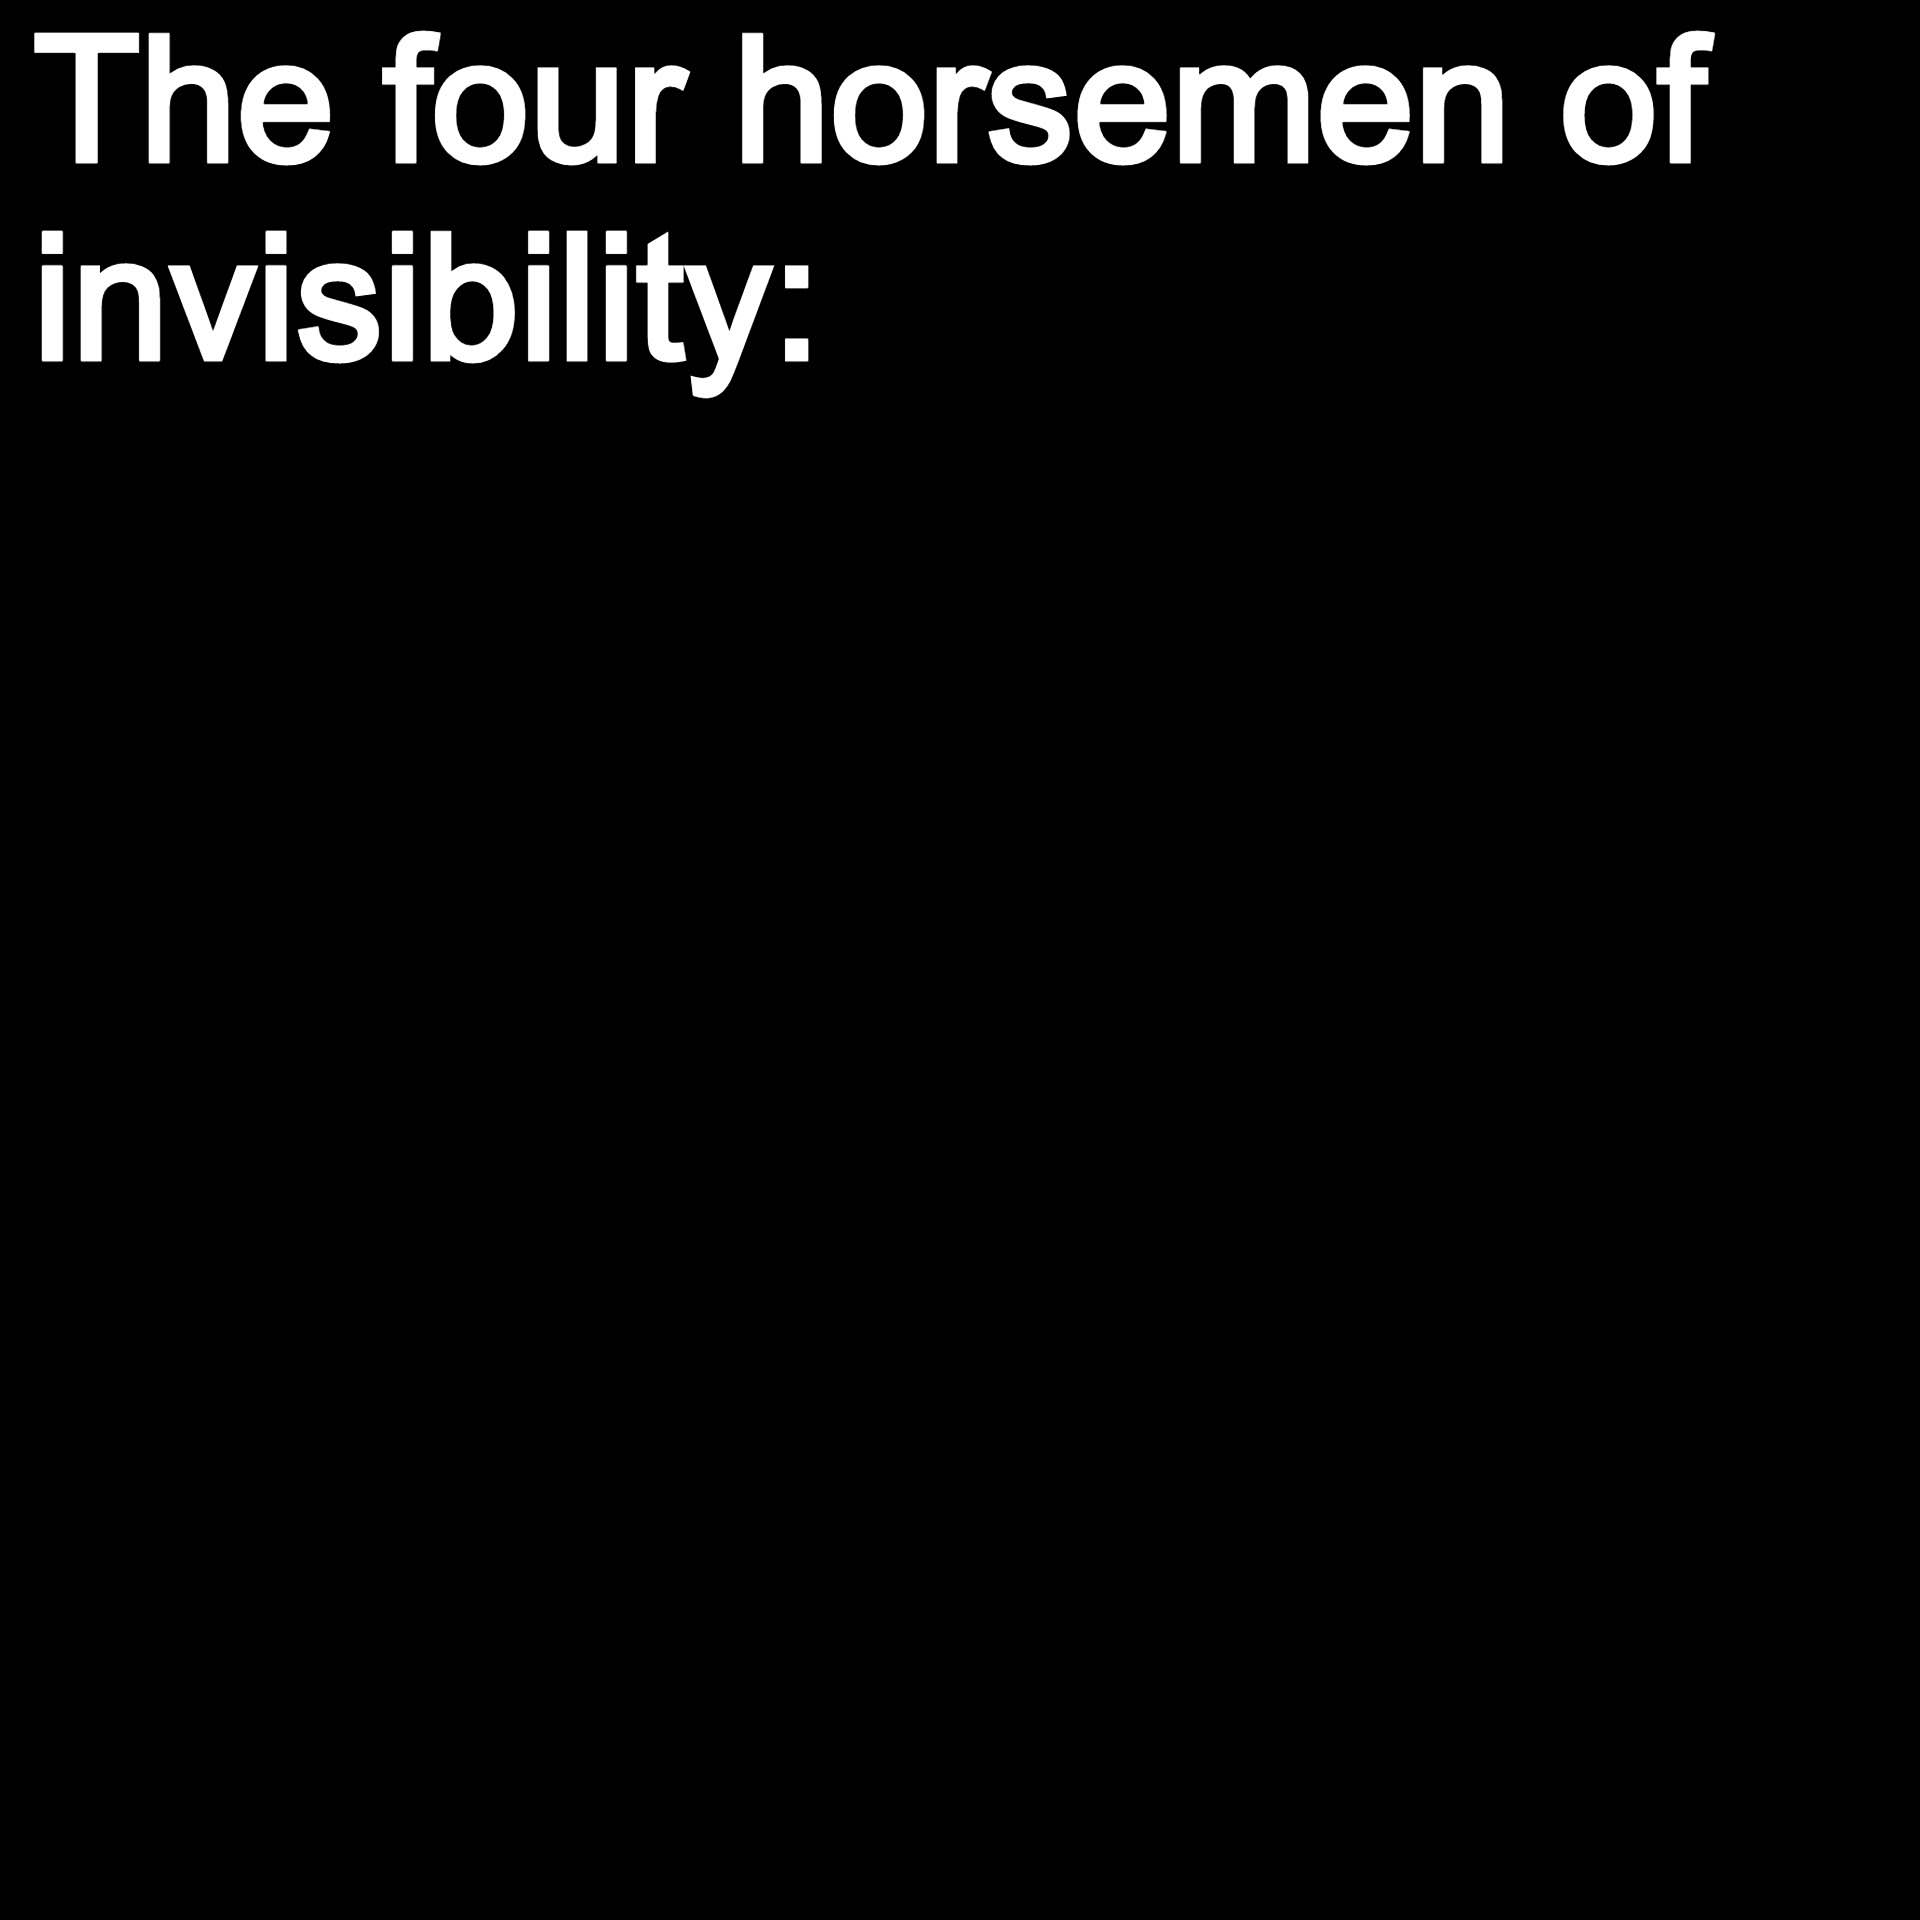 dank memes - we are only human after all - The four horsemen of invisibility